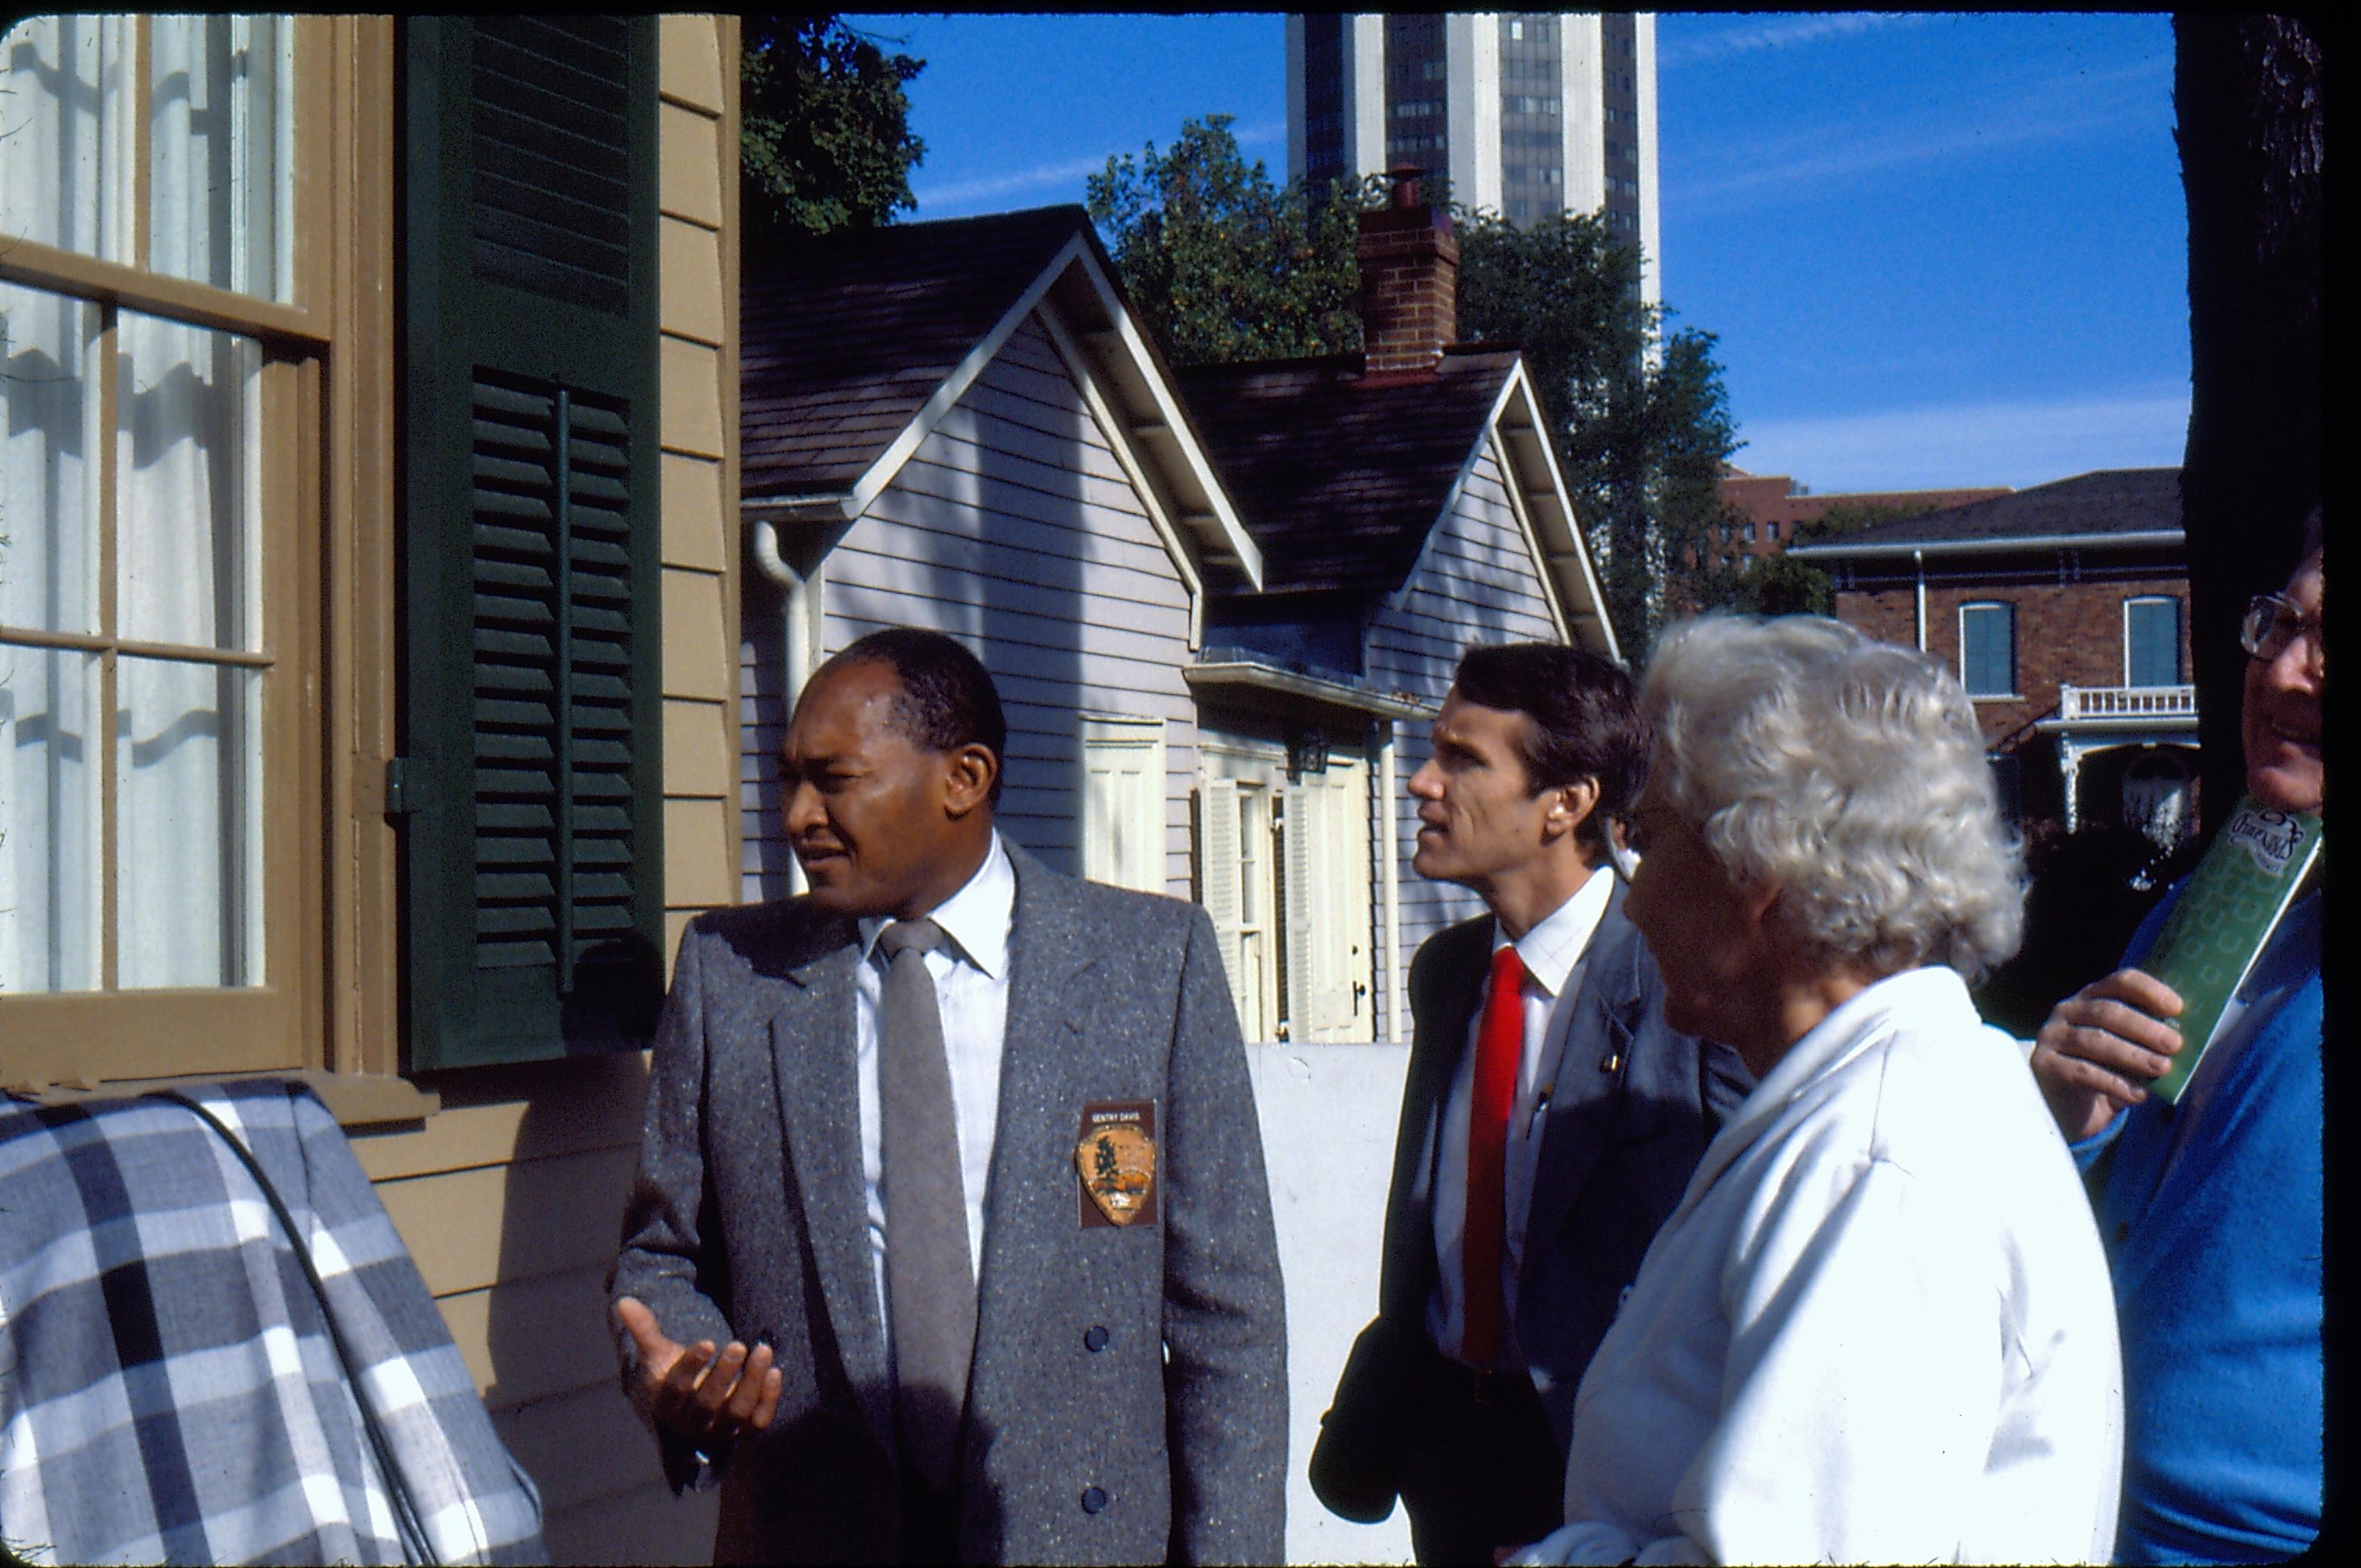 Superintendent Gentry Davis near the Lincoln Home pantry giving a tour to a VIP group after the Restoration of the Lincoln Home. The Corneau House and Conference Center appear in the background. Photographer facing north.